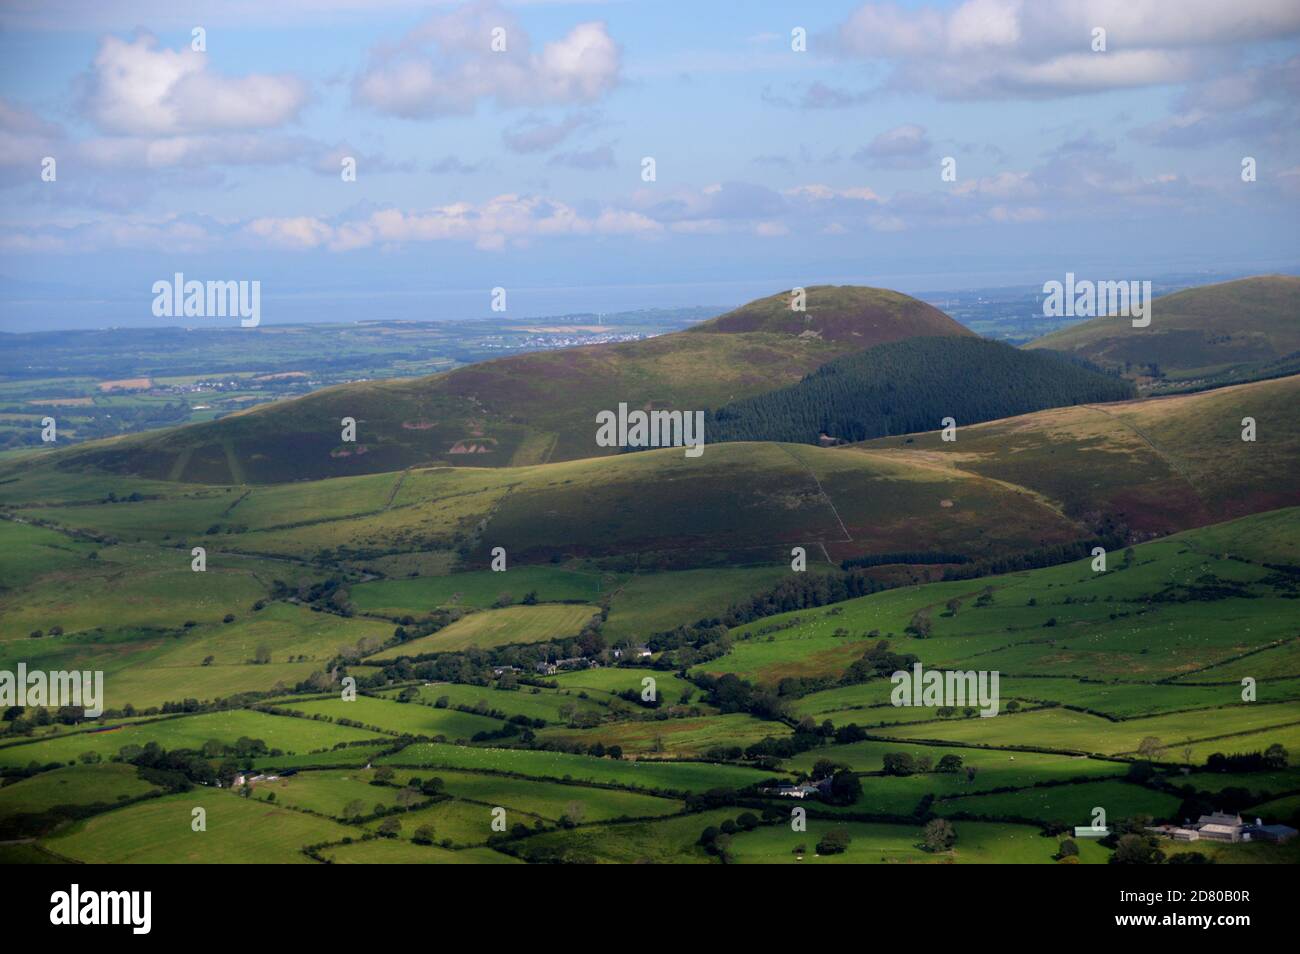 The Hill Knock Murton one of the Lamplugh Fells from the Summit of the Wainwright 'Crag Fell' Lake District National Park, Cumbria, England Stock Photo